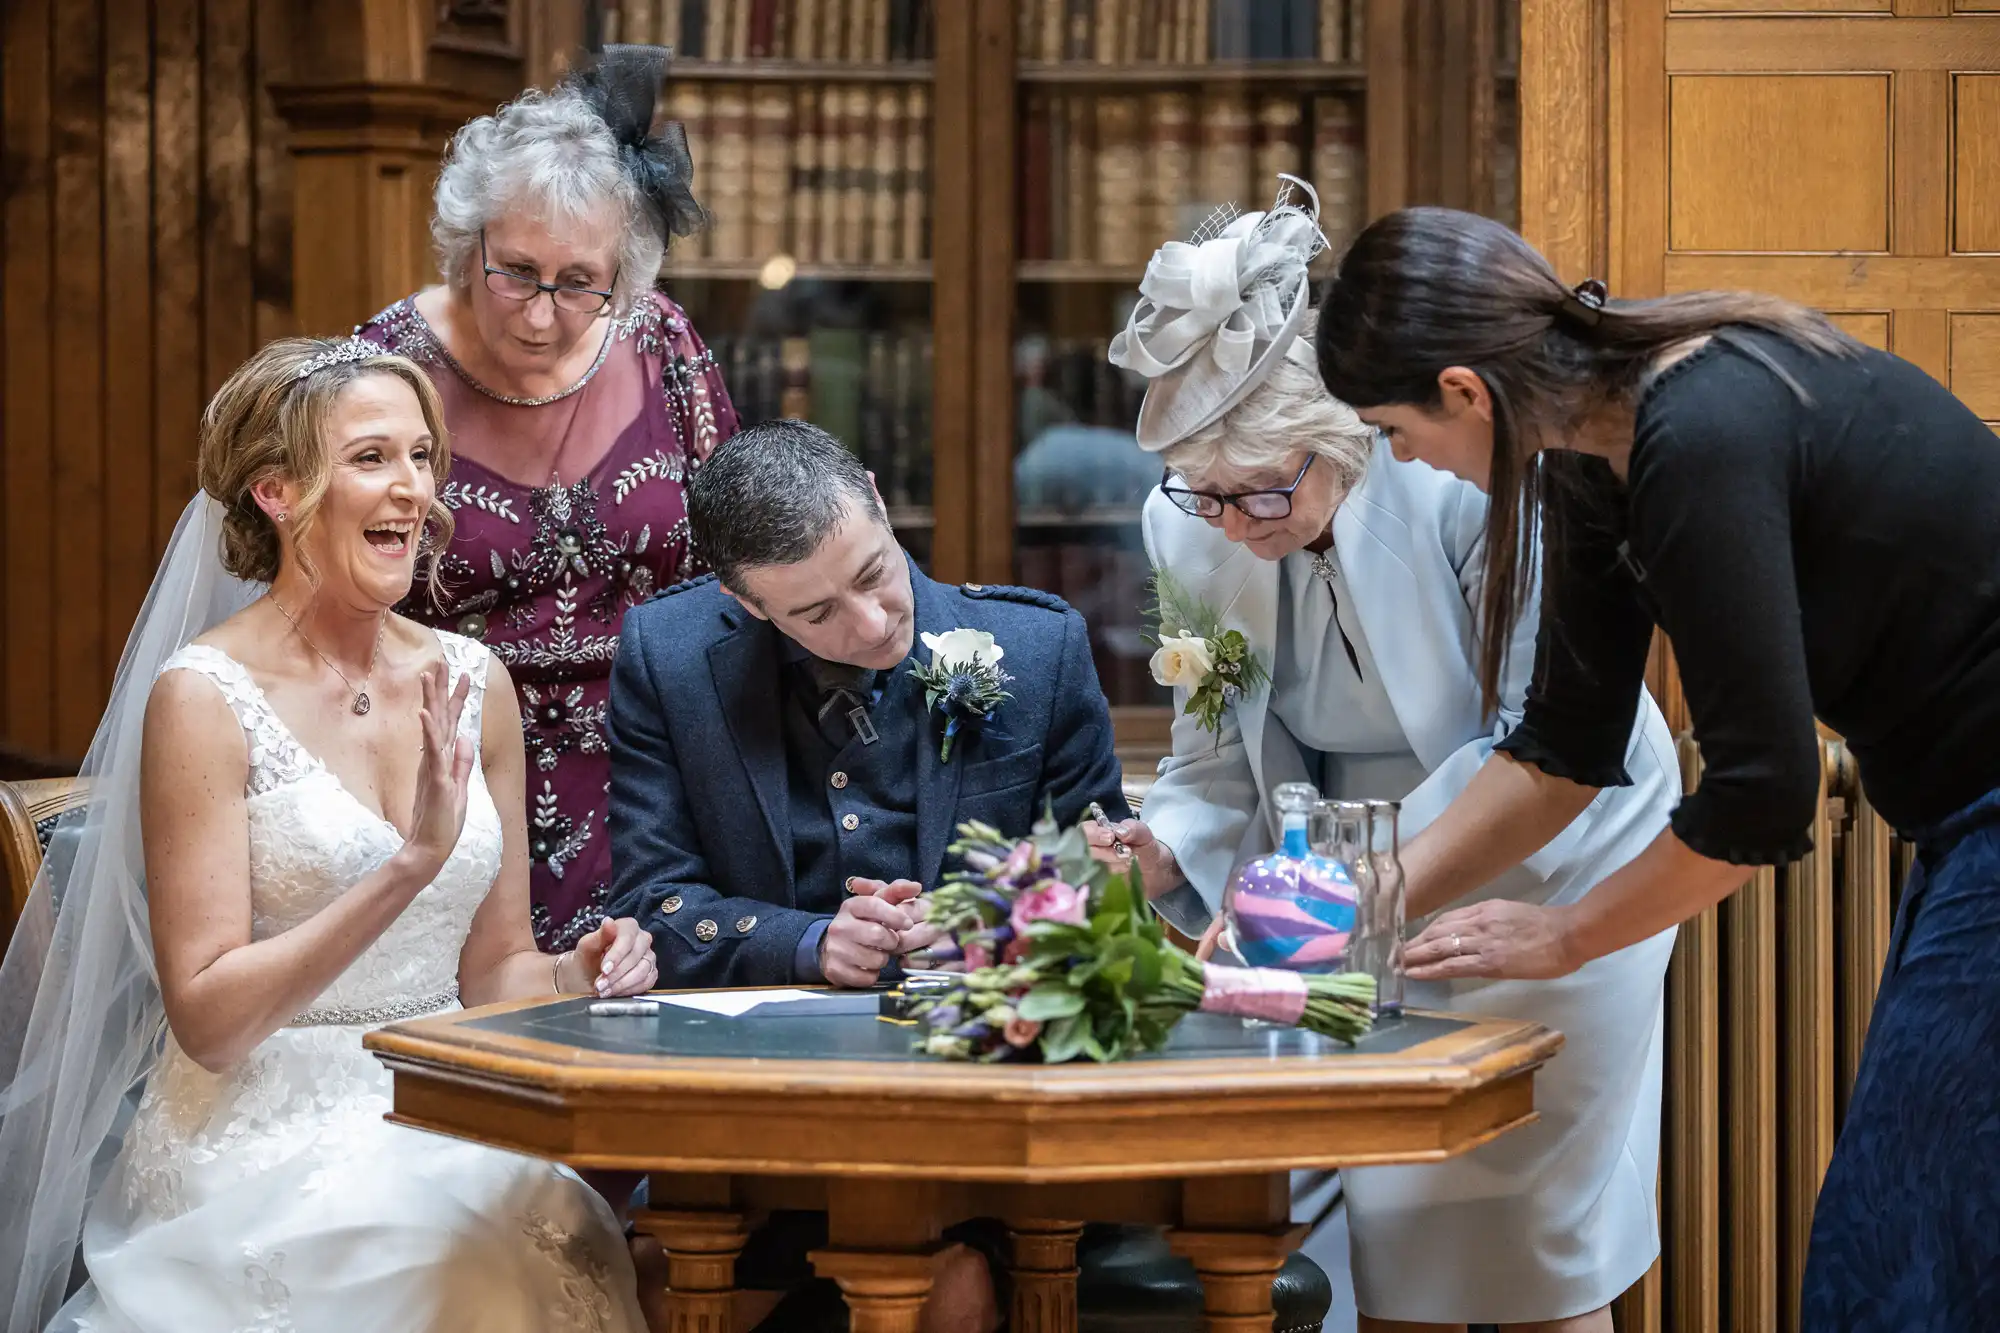 A group of people, including a bride and groom, are seated at a table in a formal setting, possibly a wedding venue. They are signing documents with the help of a woman. Flowers are on the table.